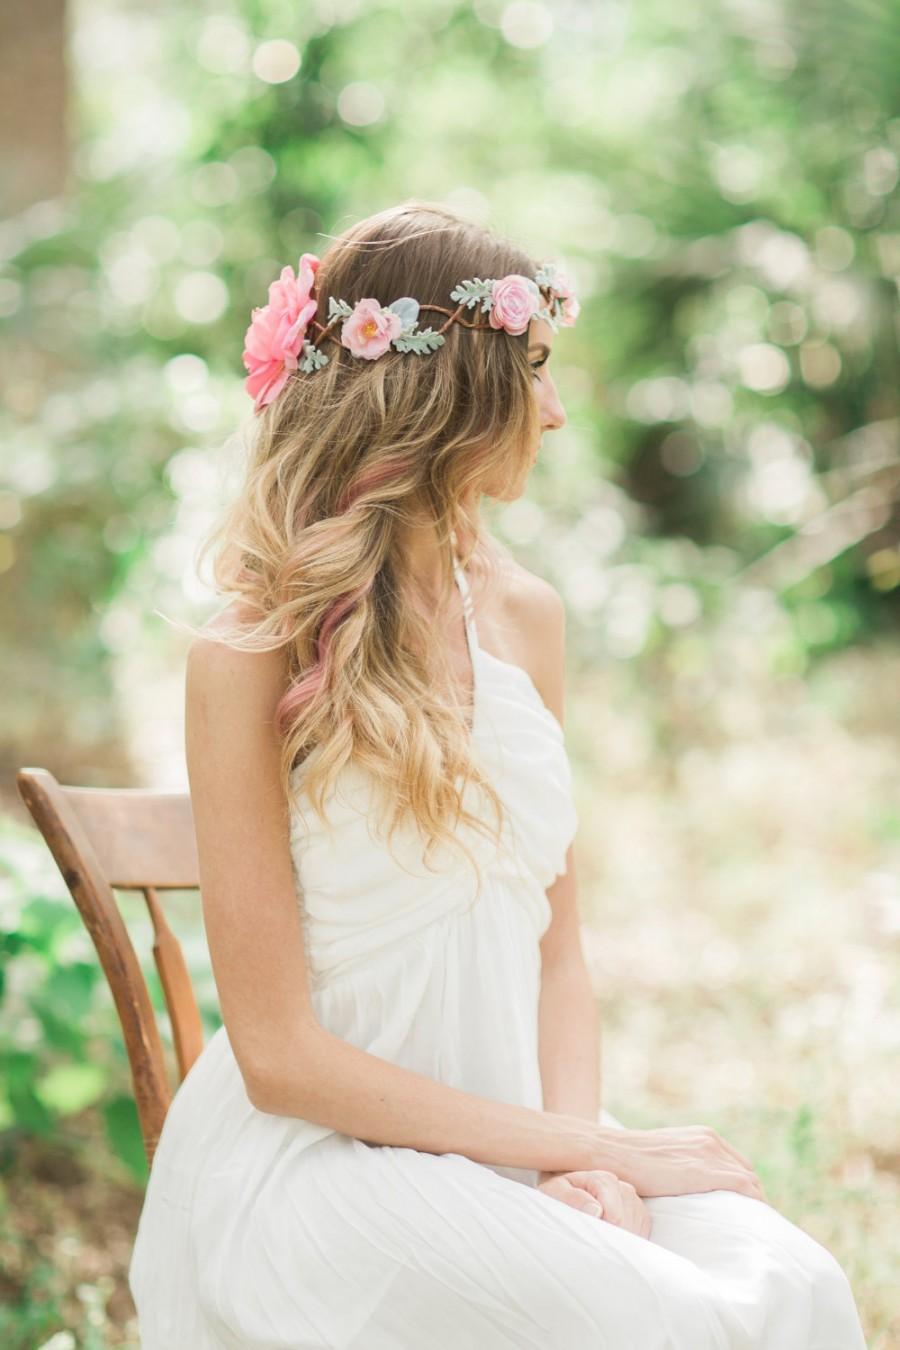 Hochzeit - The Nicala Flower Crown with wild roses, ranunculus, and dusty miller